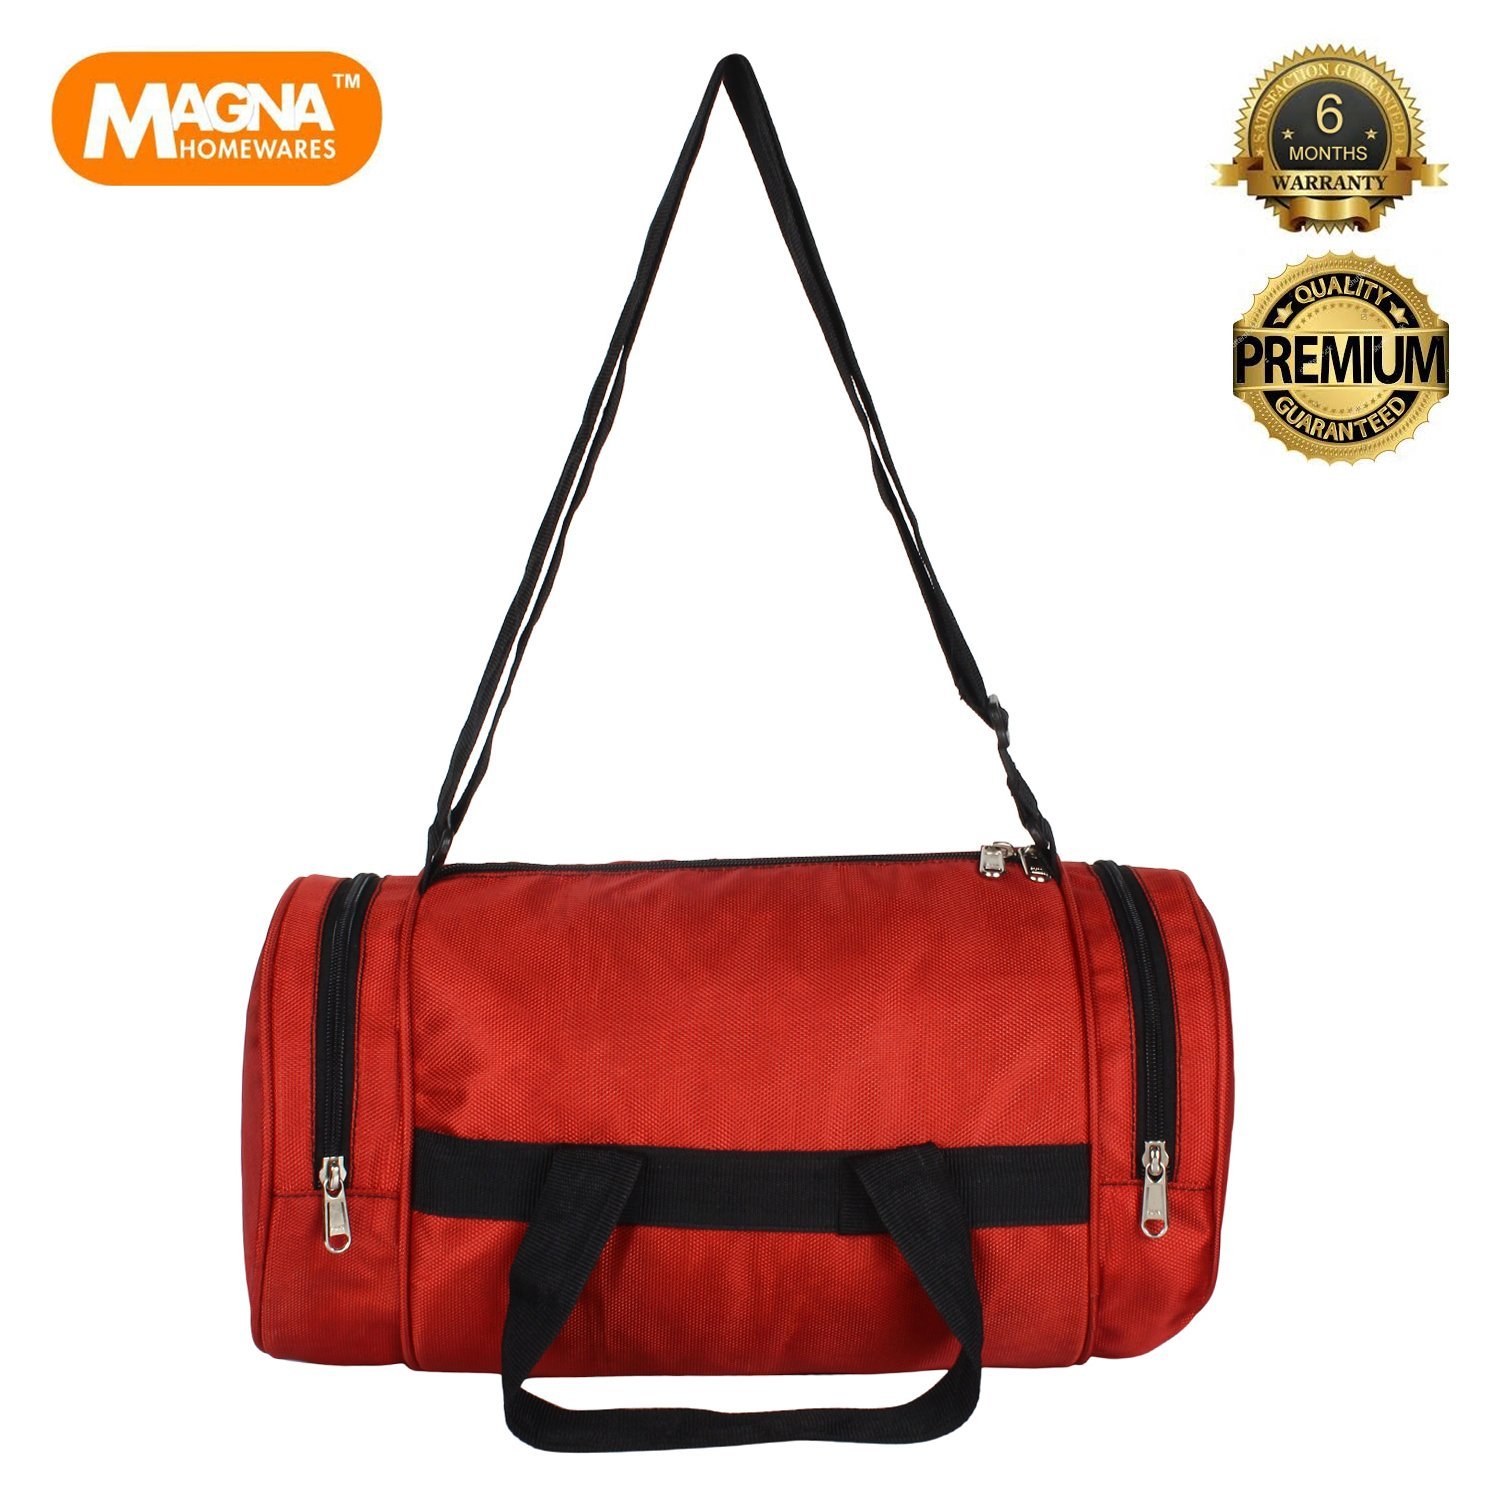 Magna Red Gym Bag At Rs 279 - Amazon